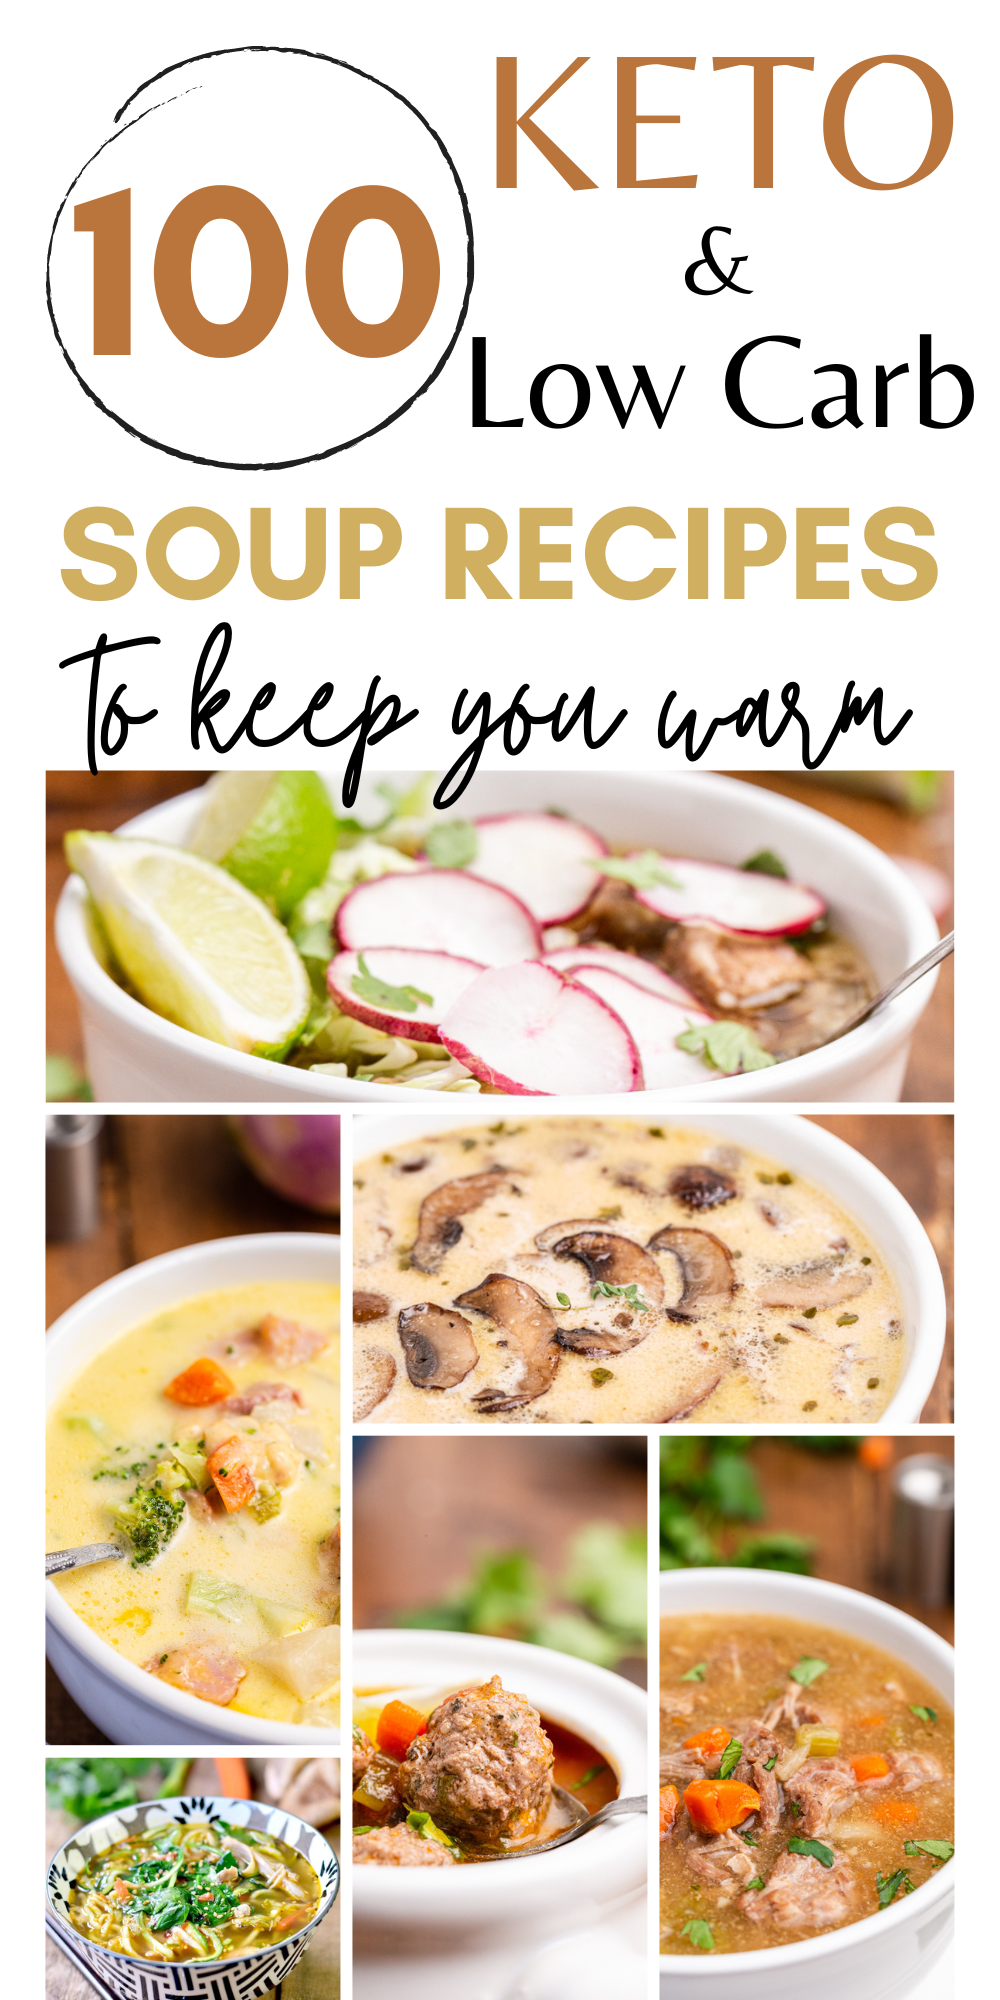 Pinterest graphic with images of keto and low carb soups and stews on it.